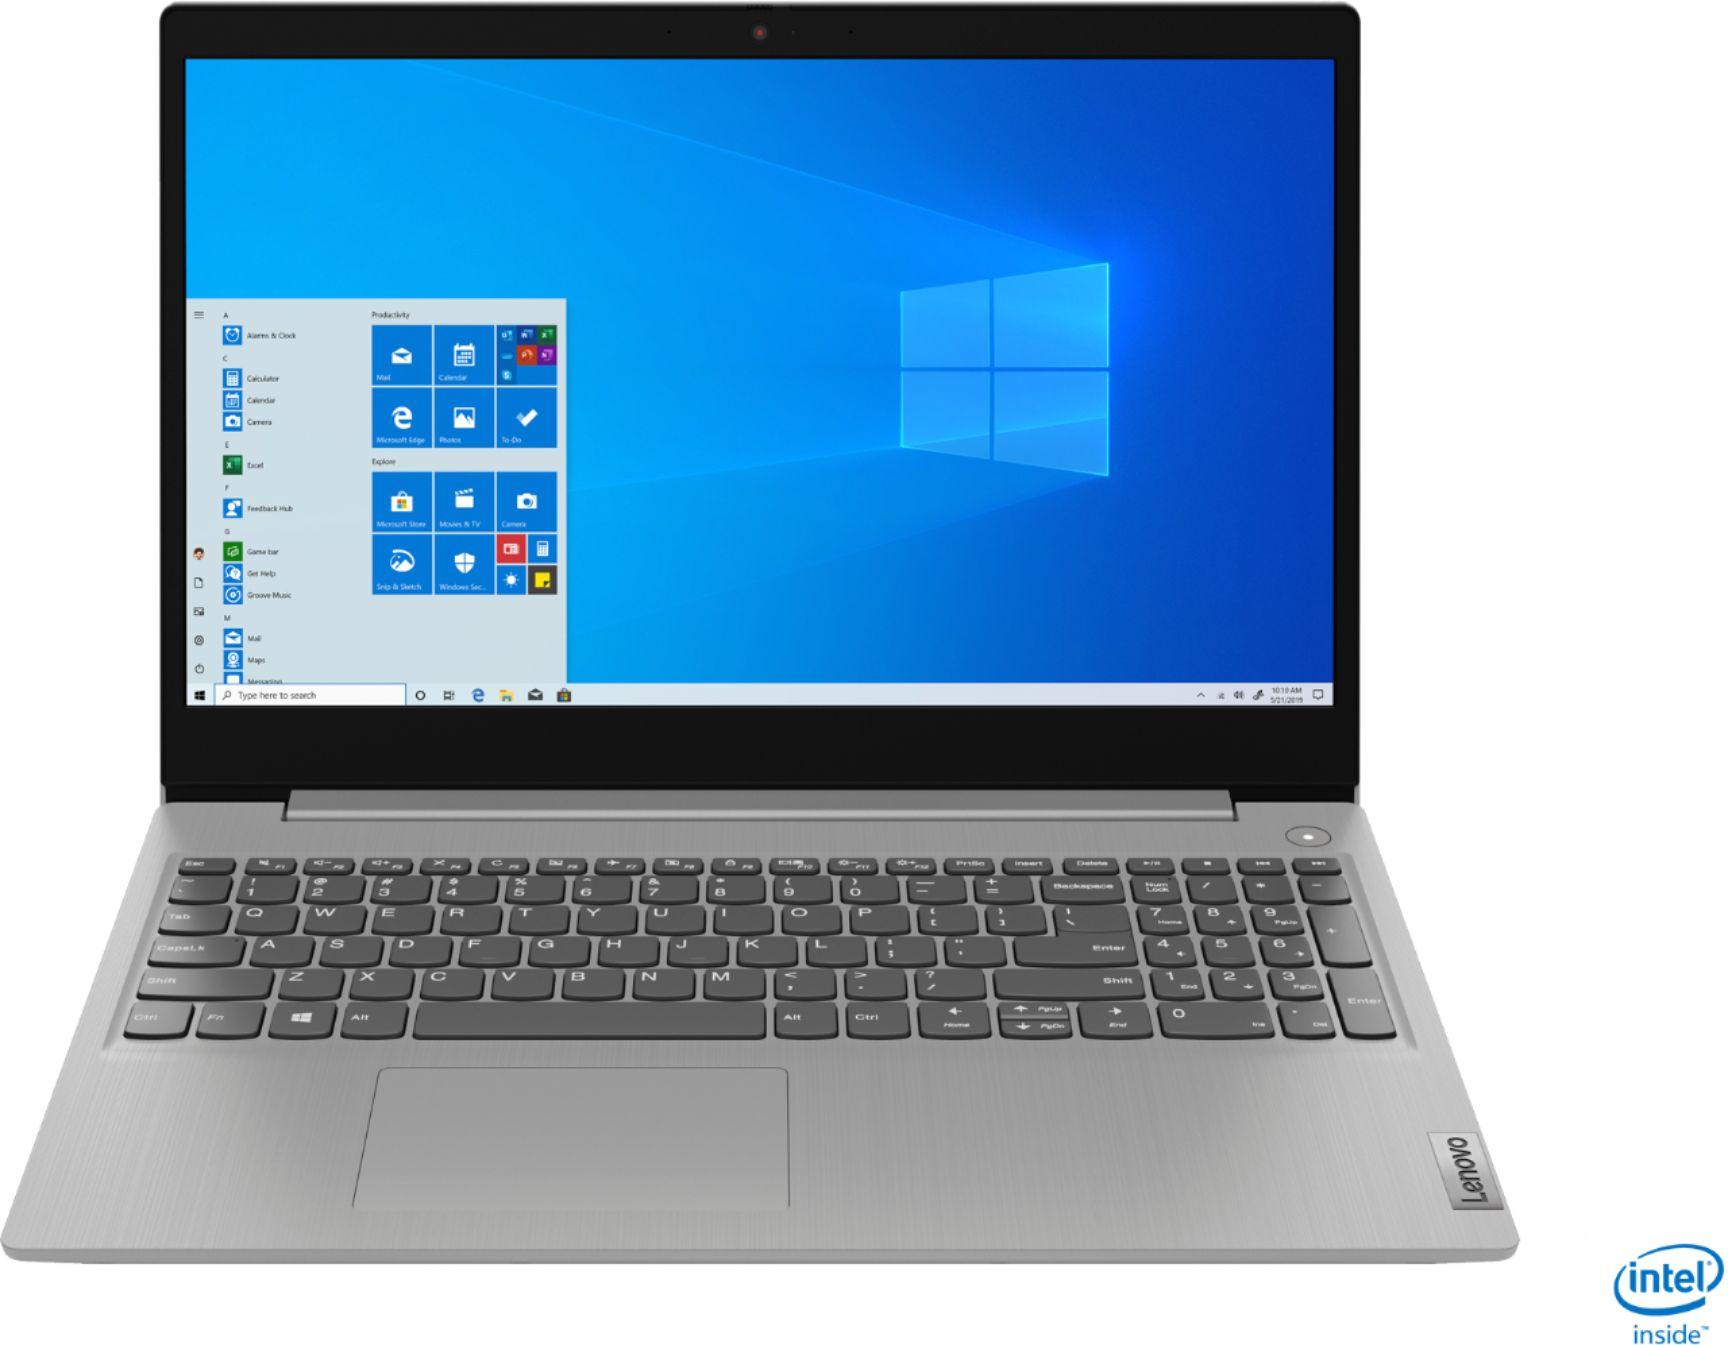 Lenovo IdeaPad 3 15.6in i5 12GB 256GB Touchscreen Laptop for $349.99 Shipped